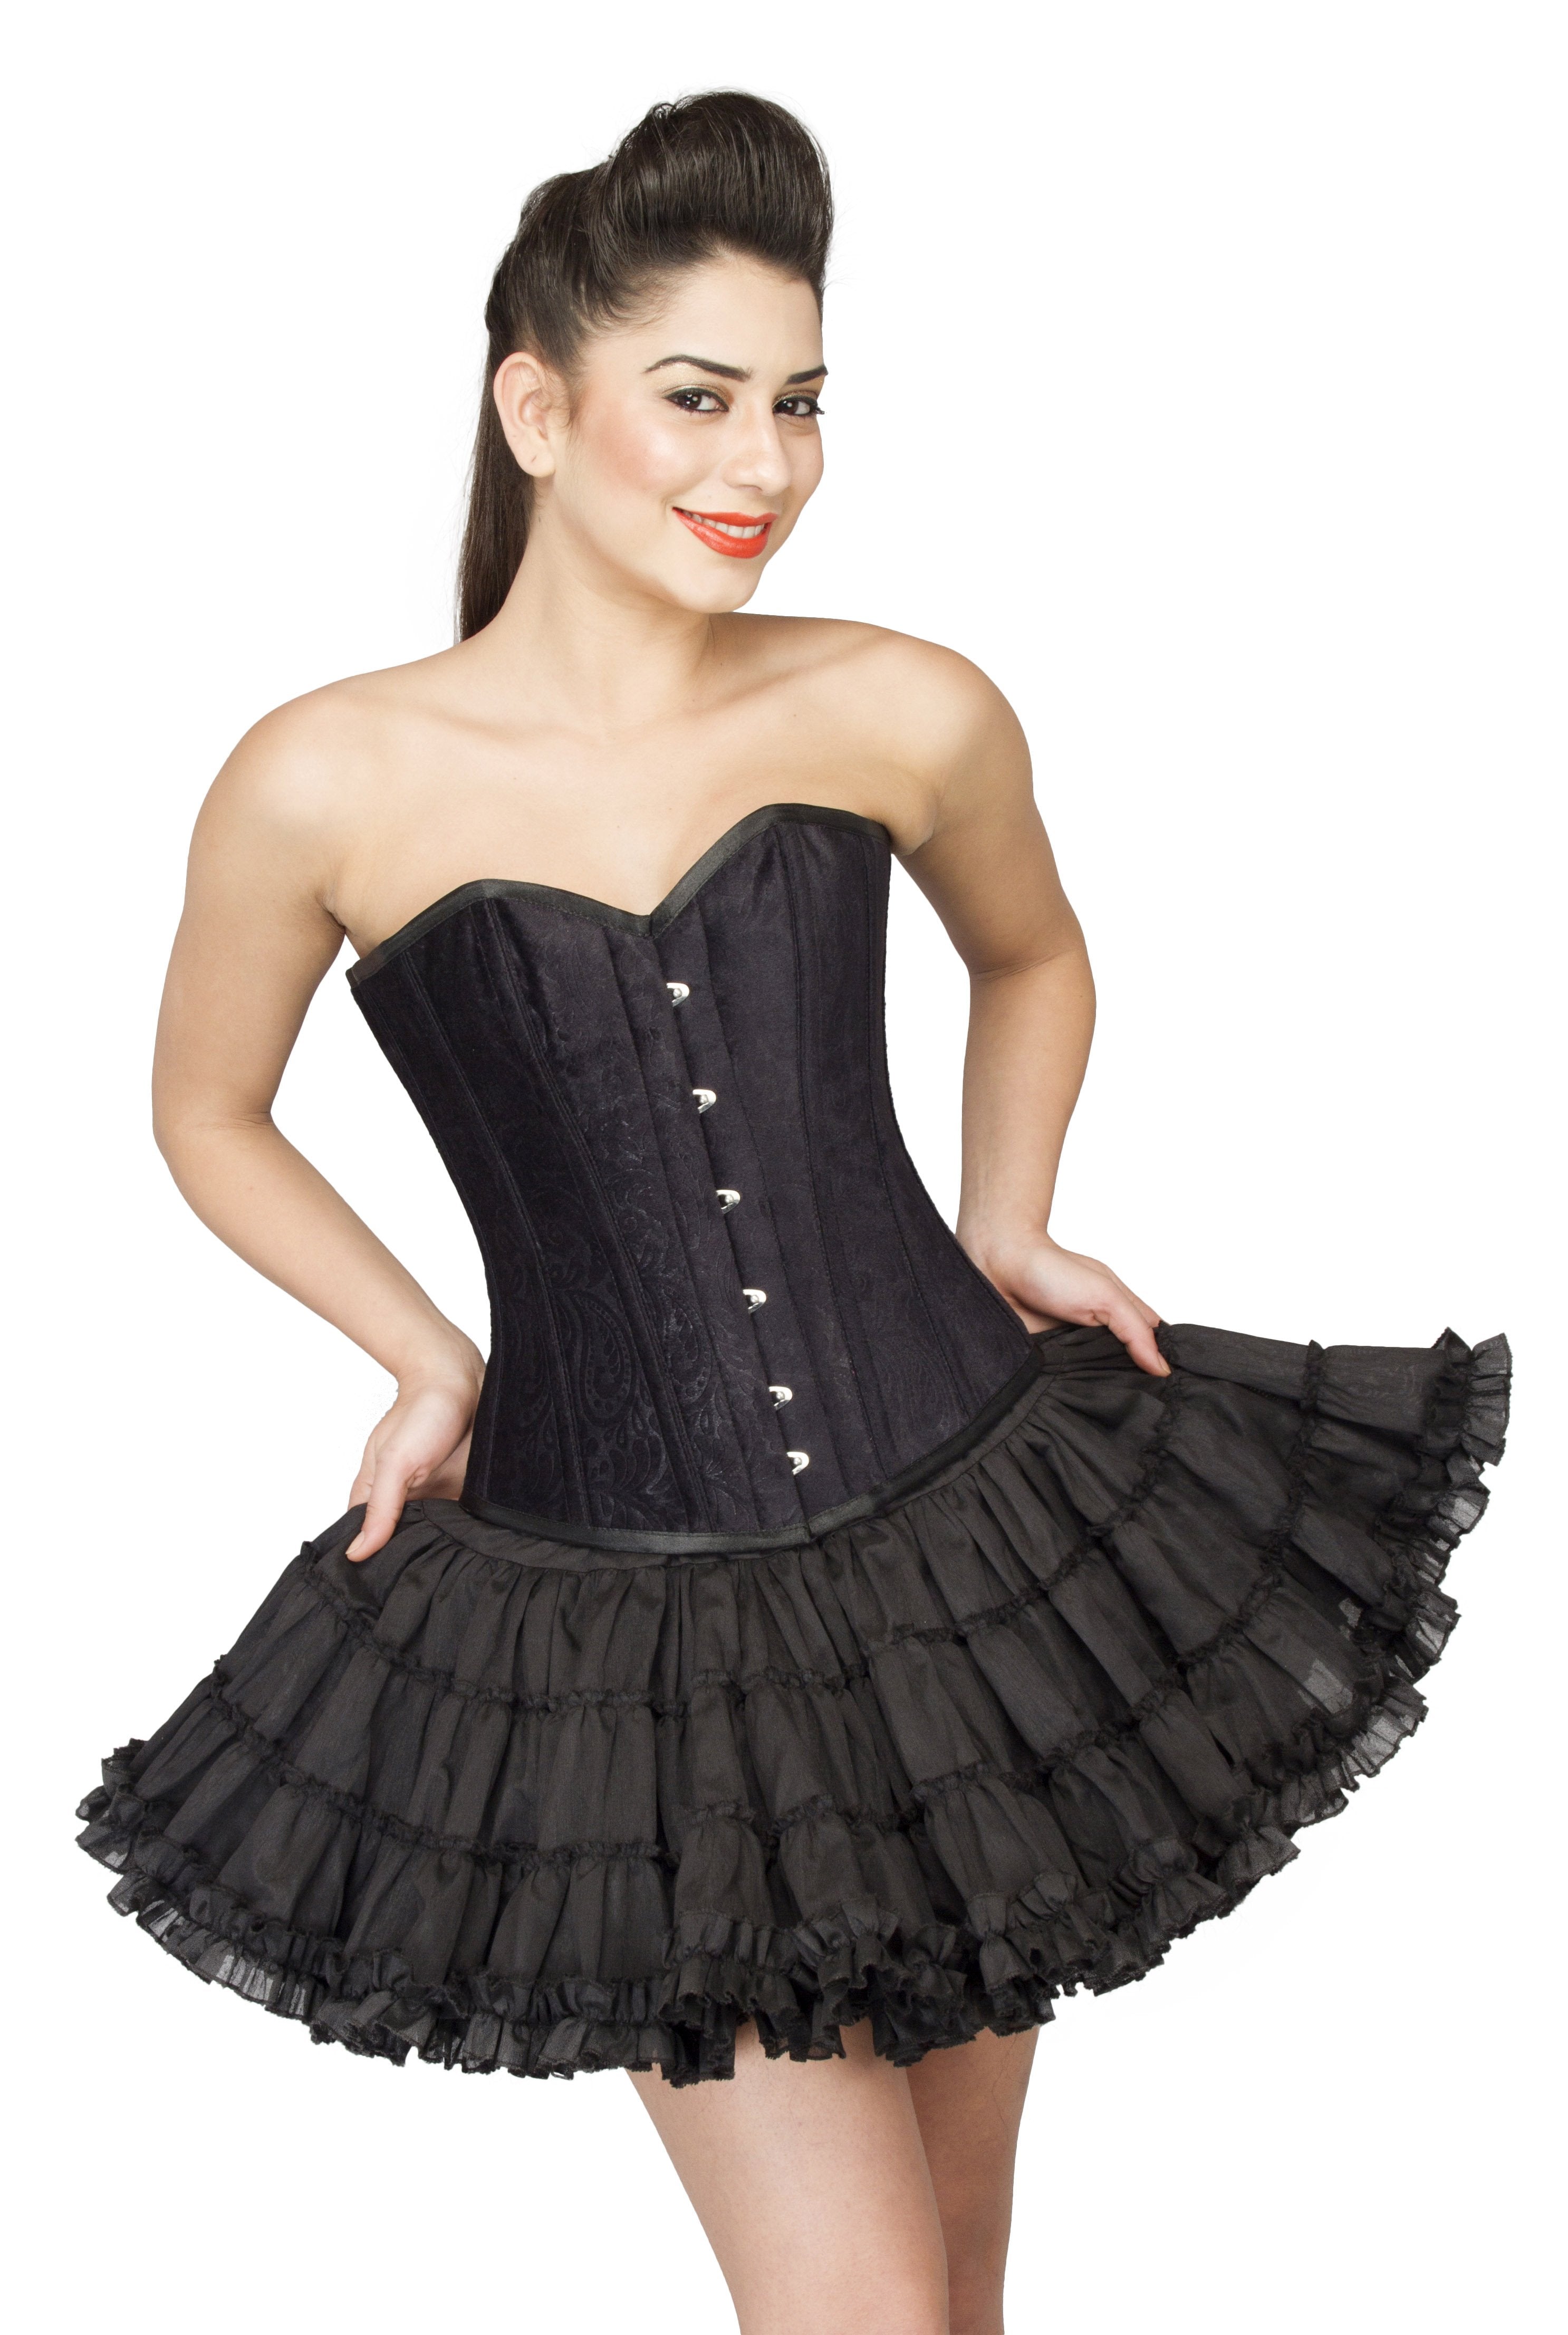 Buy Online Gothic Corsets for women - corsetsNmore – CorsetsNmore